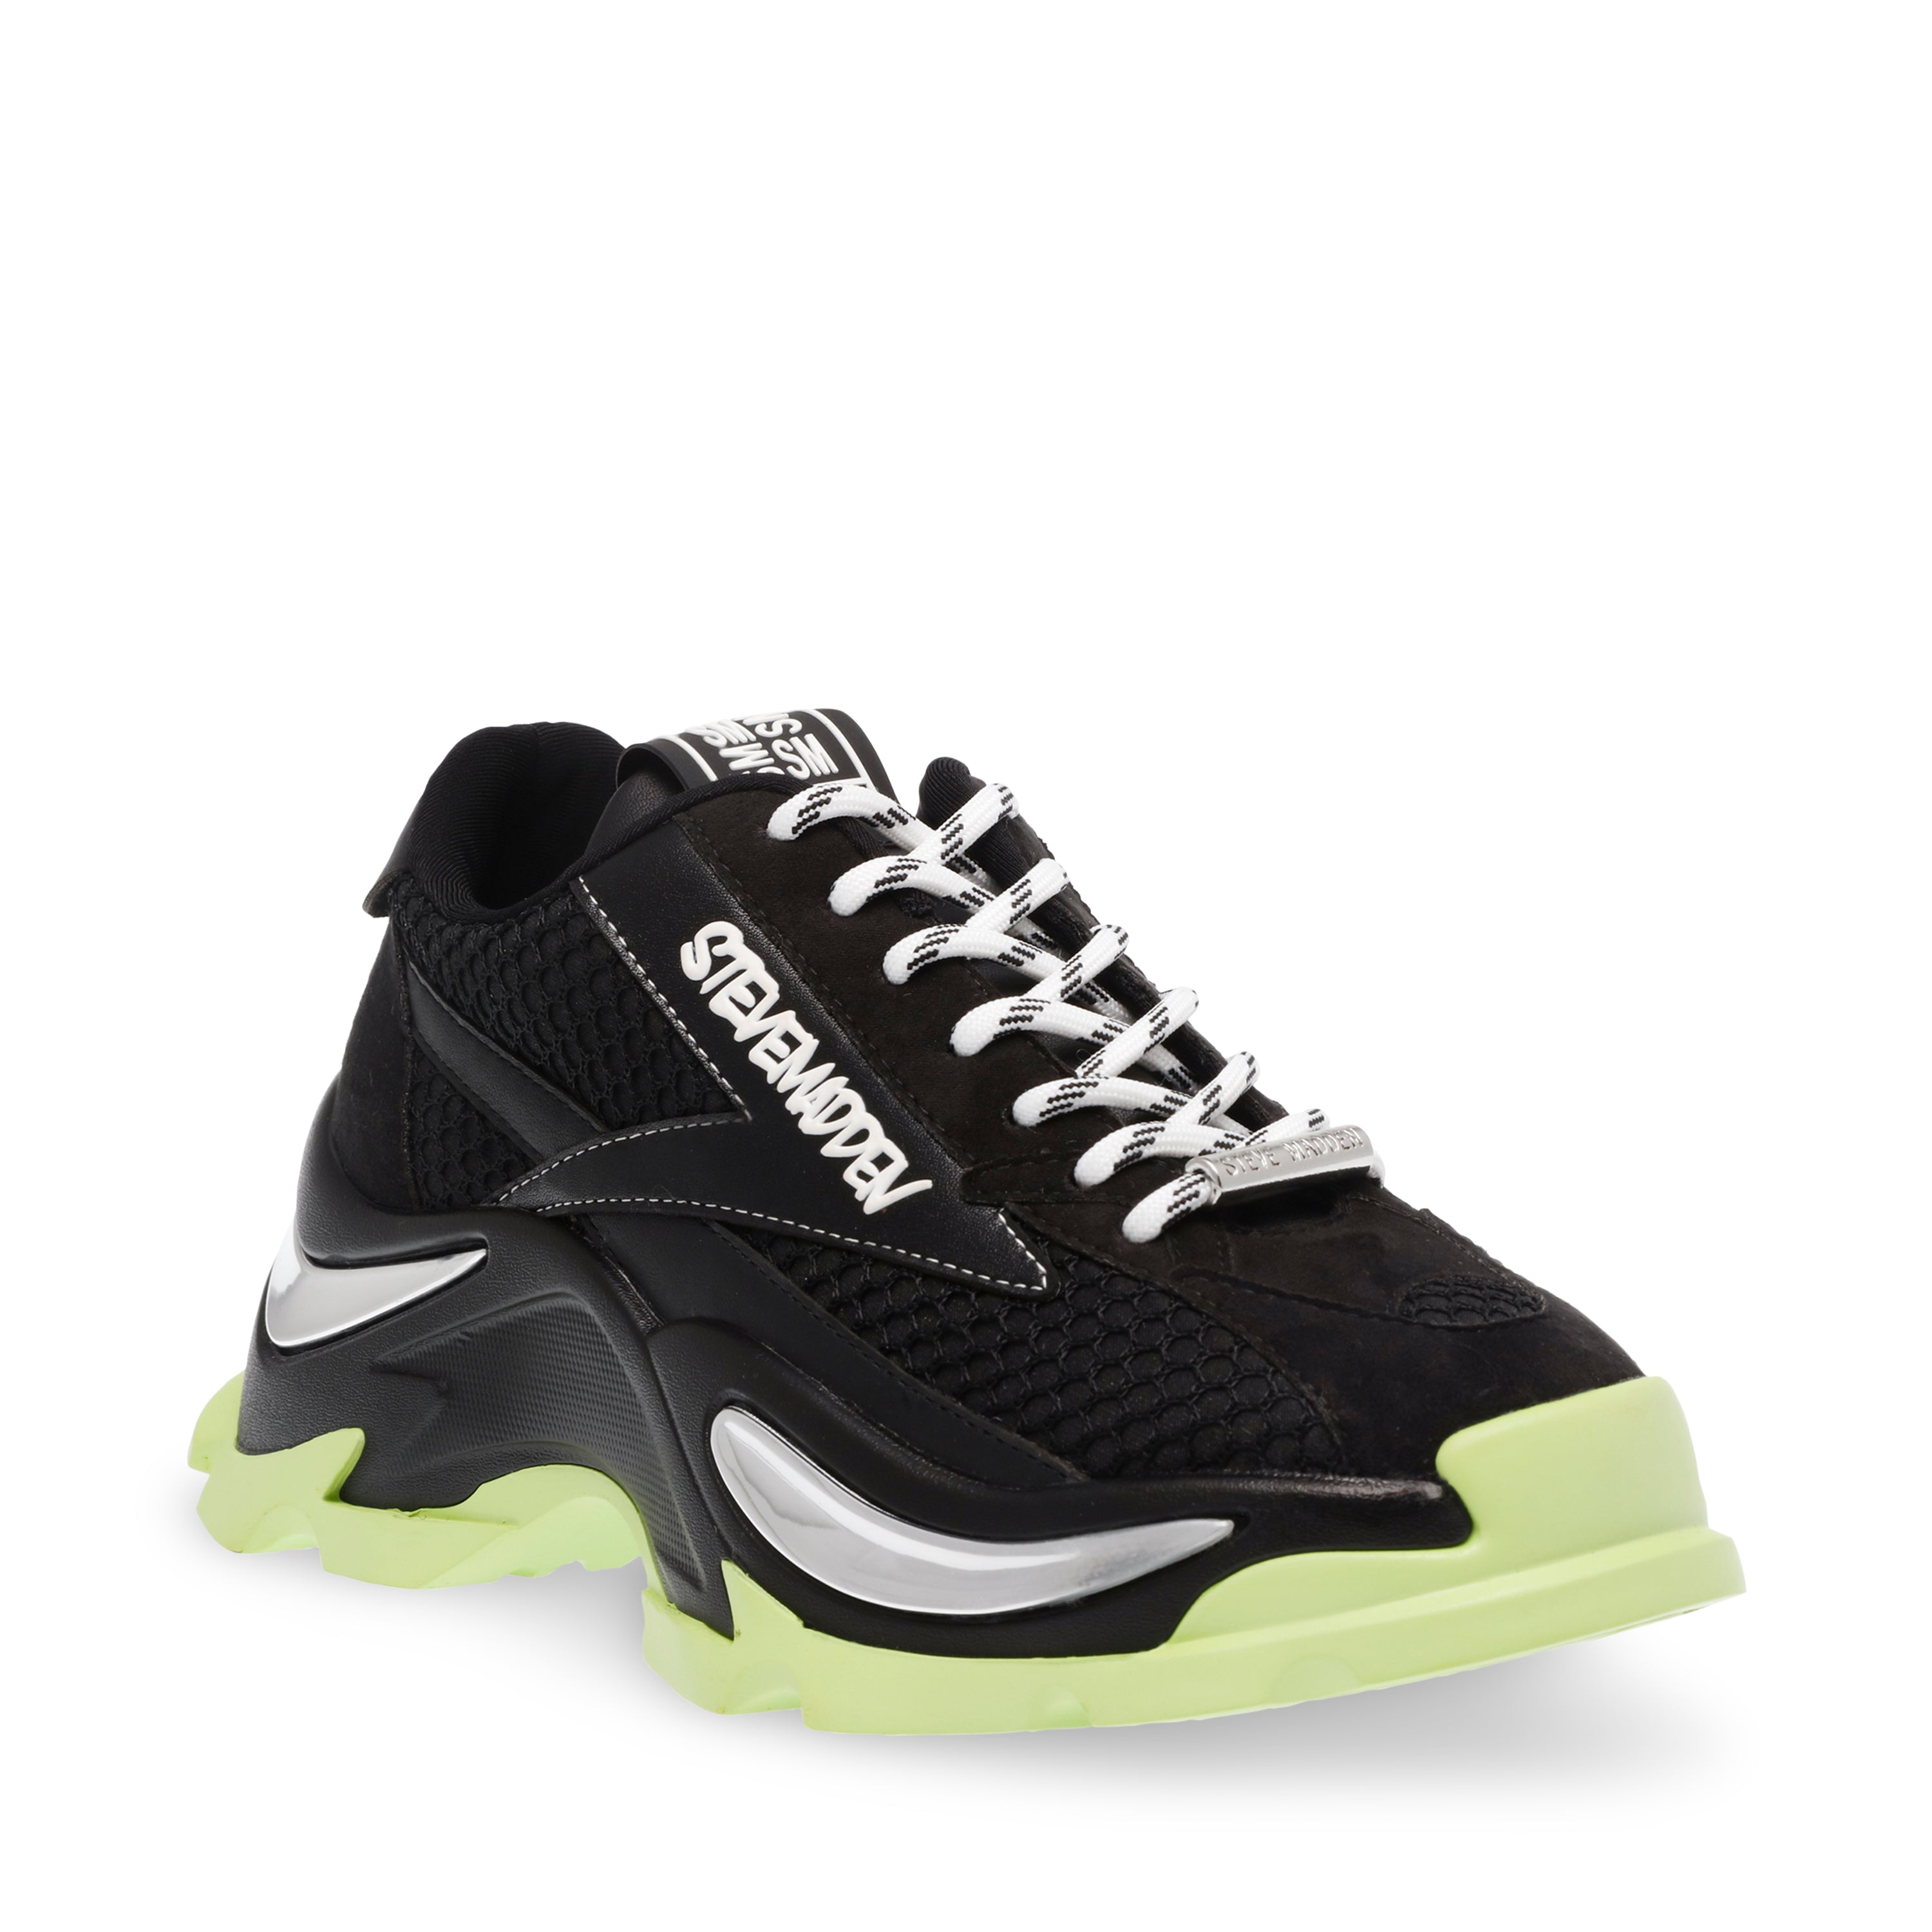 ZOOMZ BLACK/LIME- Hover Image